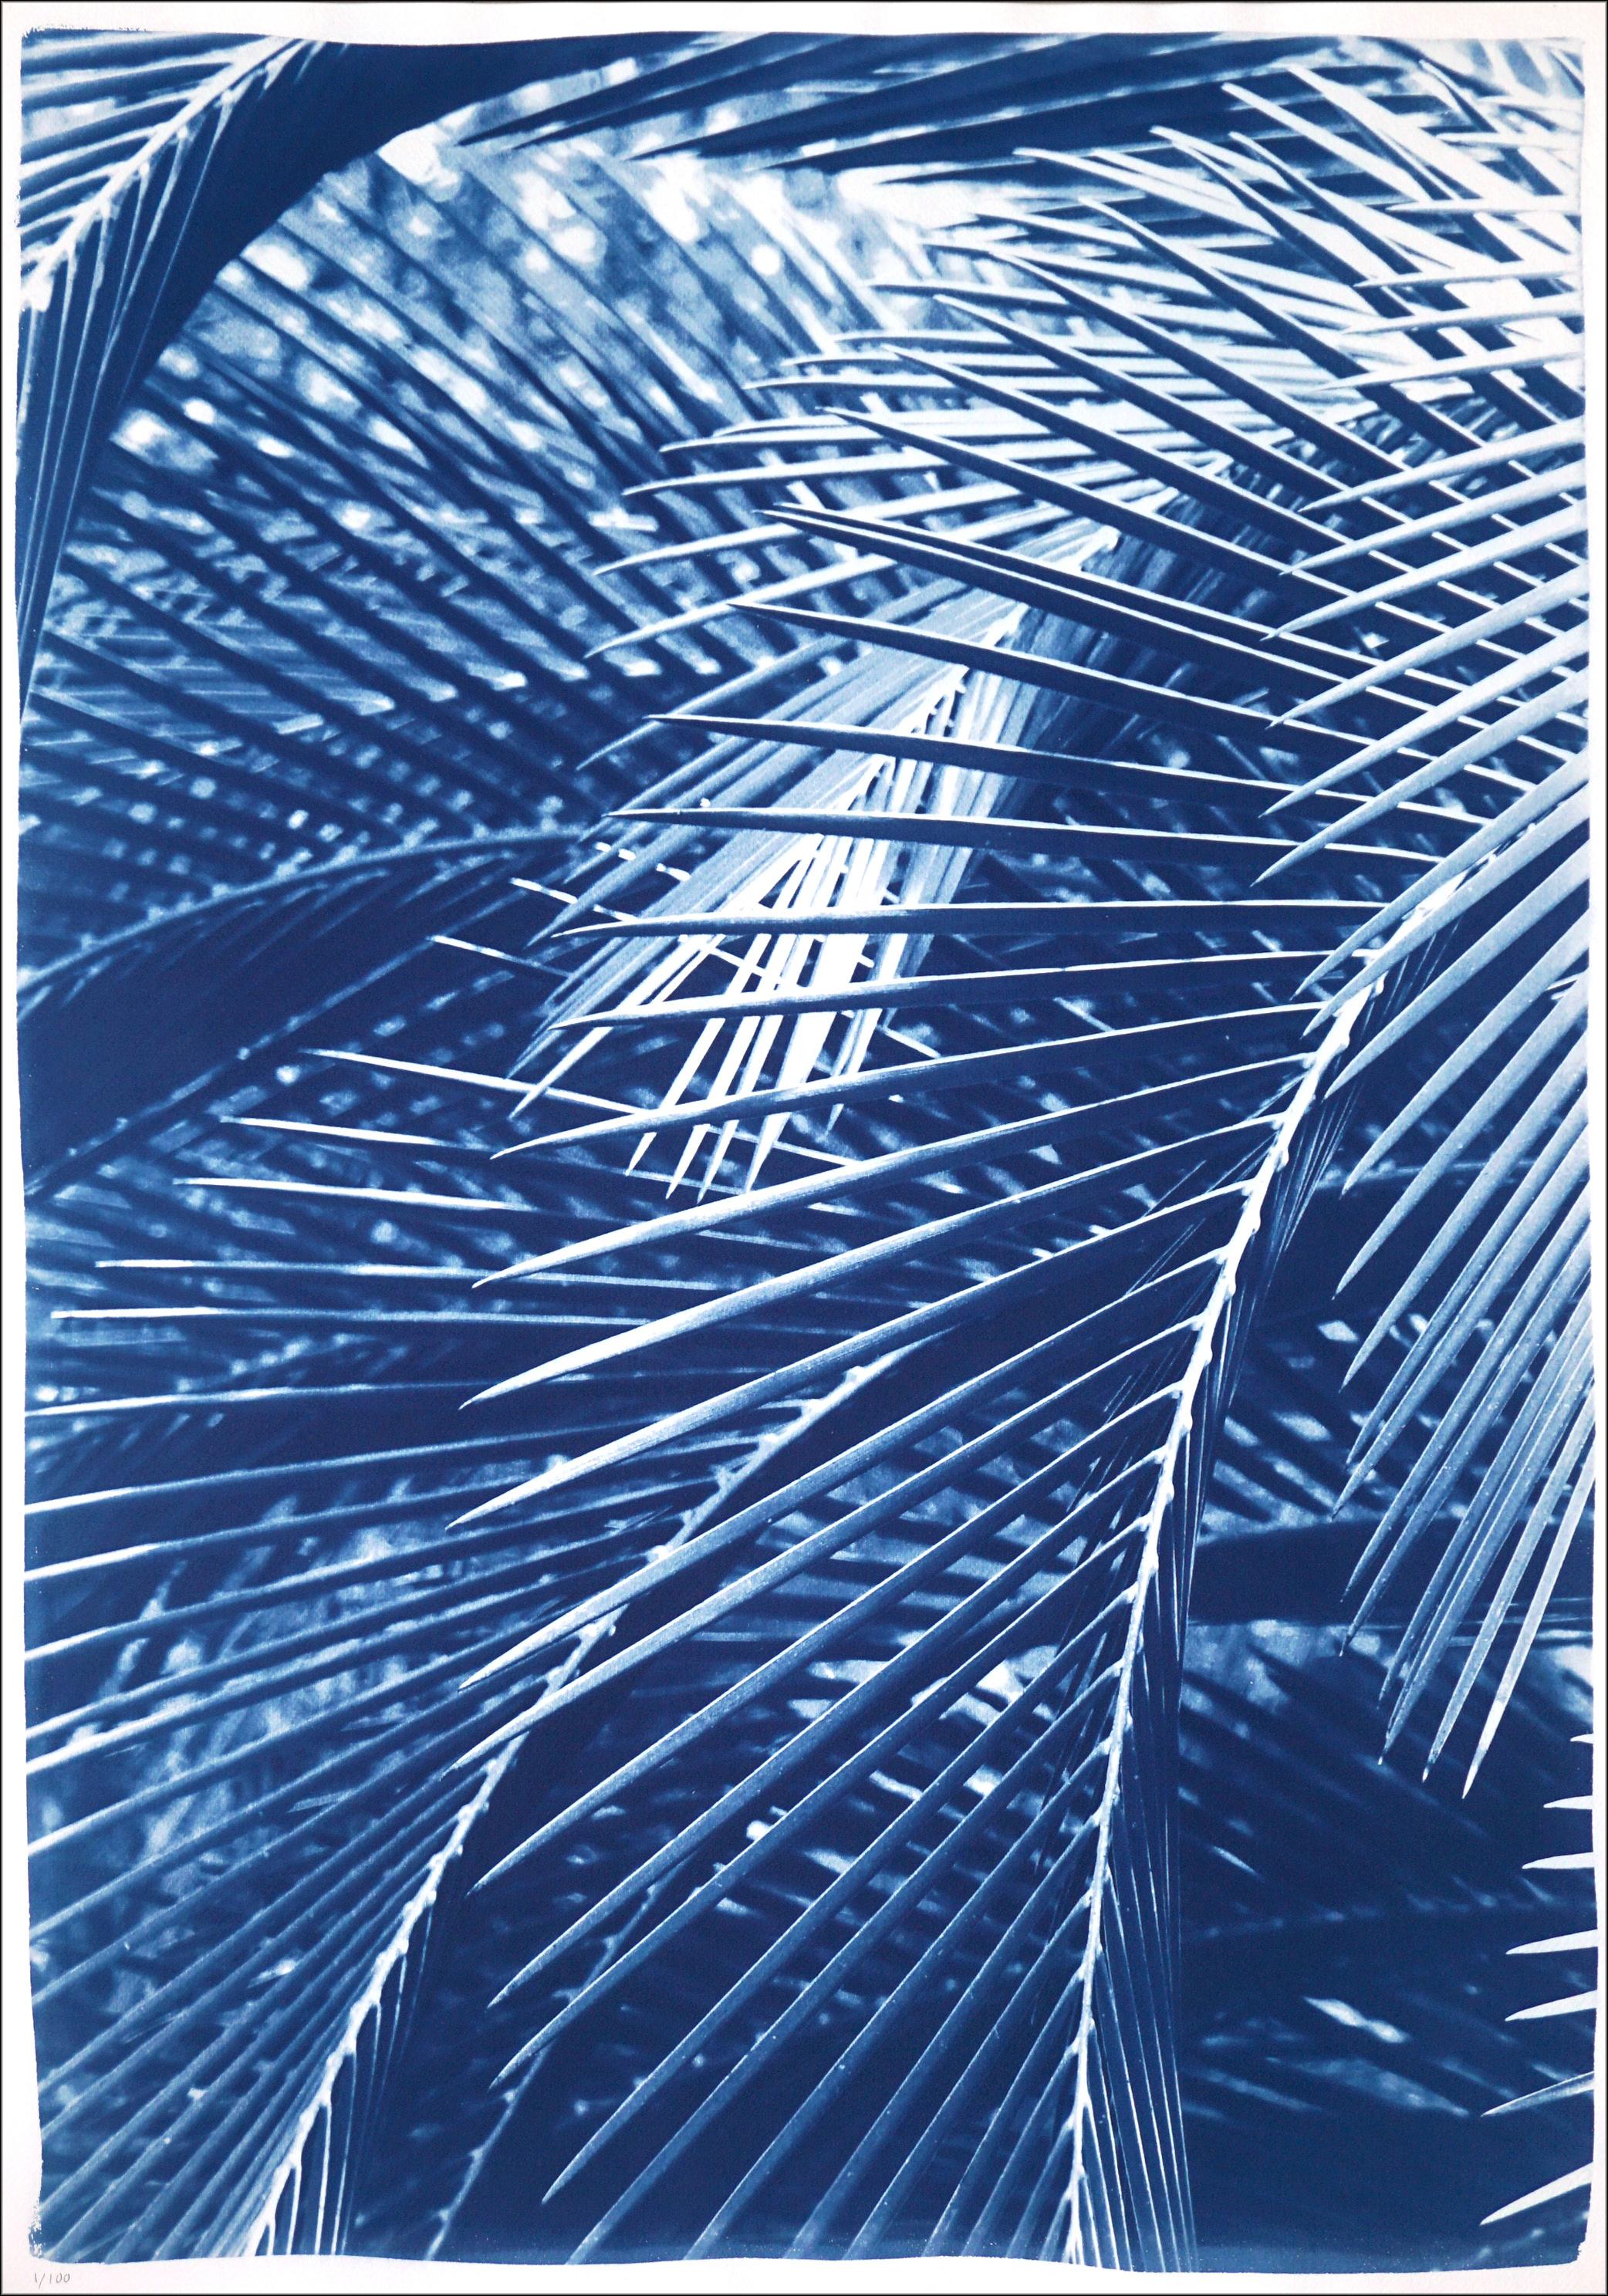 Lush Palm Bushes, Botanical Diptych, Still Life in Blue Tones, Tropical Style 4